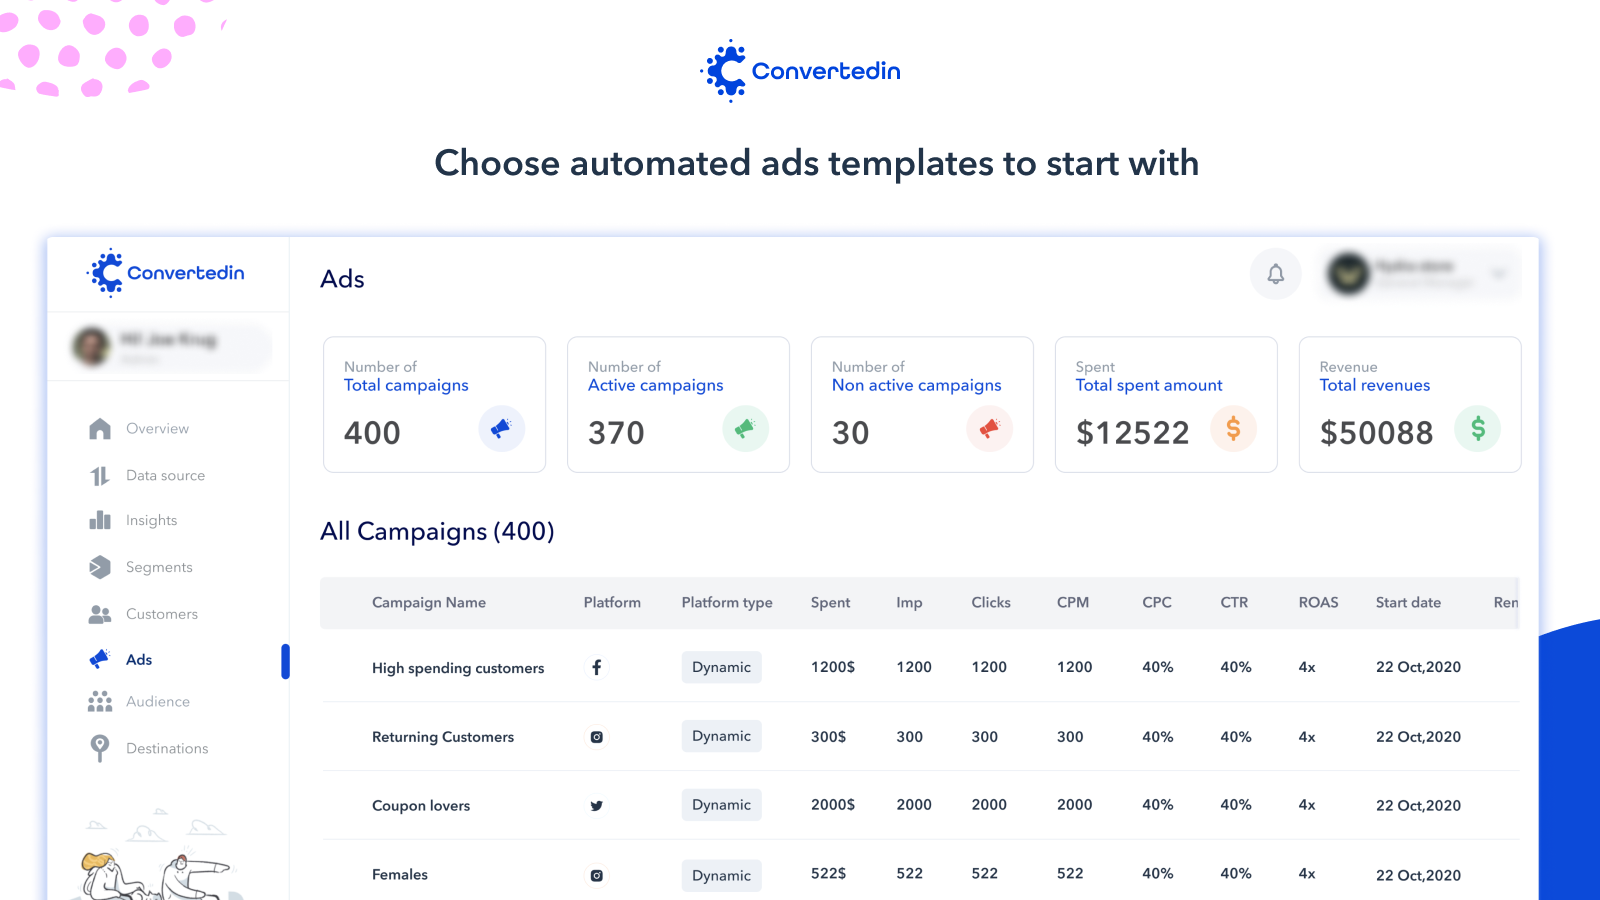 Converted.in Campaigns that are created through ready templates